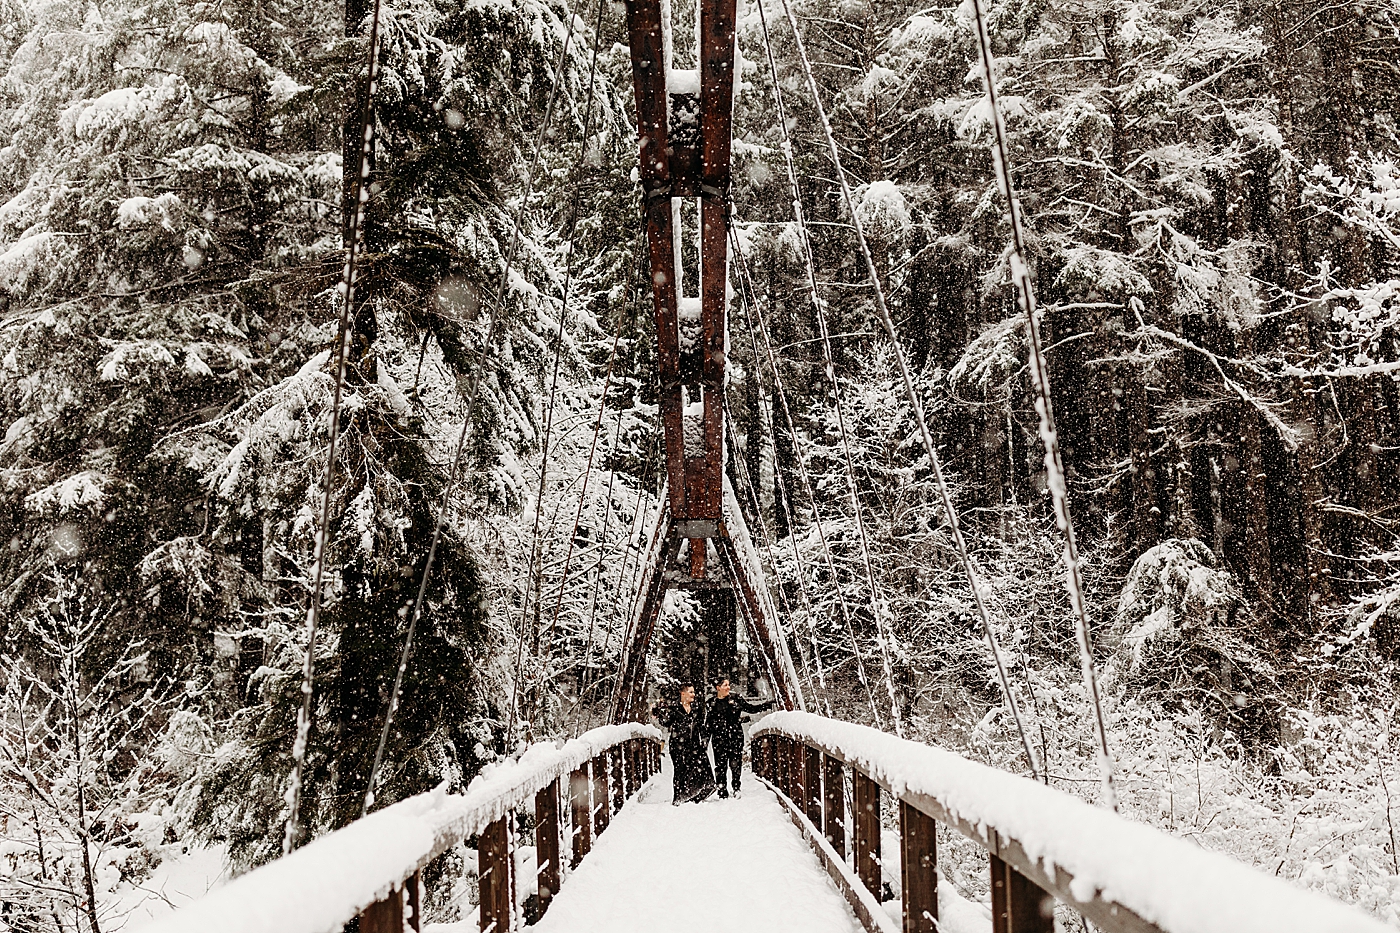 Couple walking on Middle Fork bridge covered in snow. Photo by Megan Montalvo Photography.